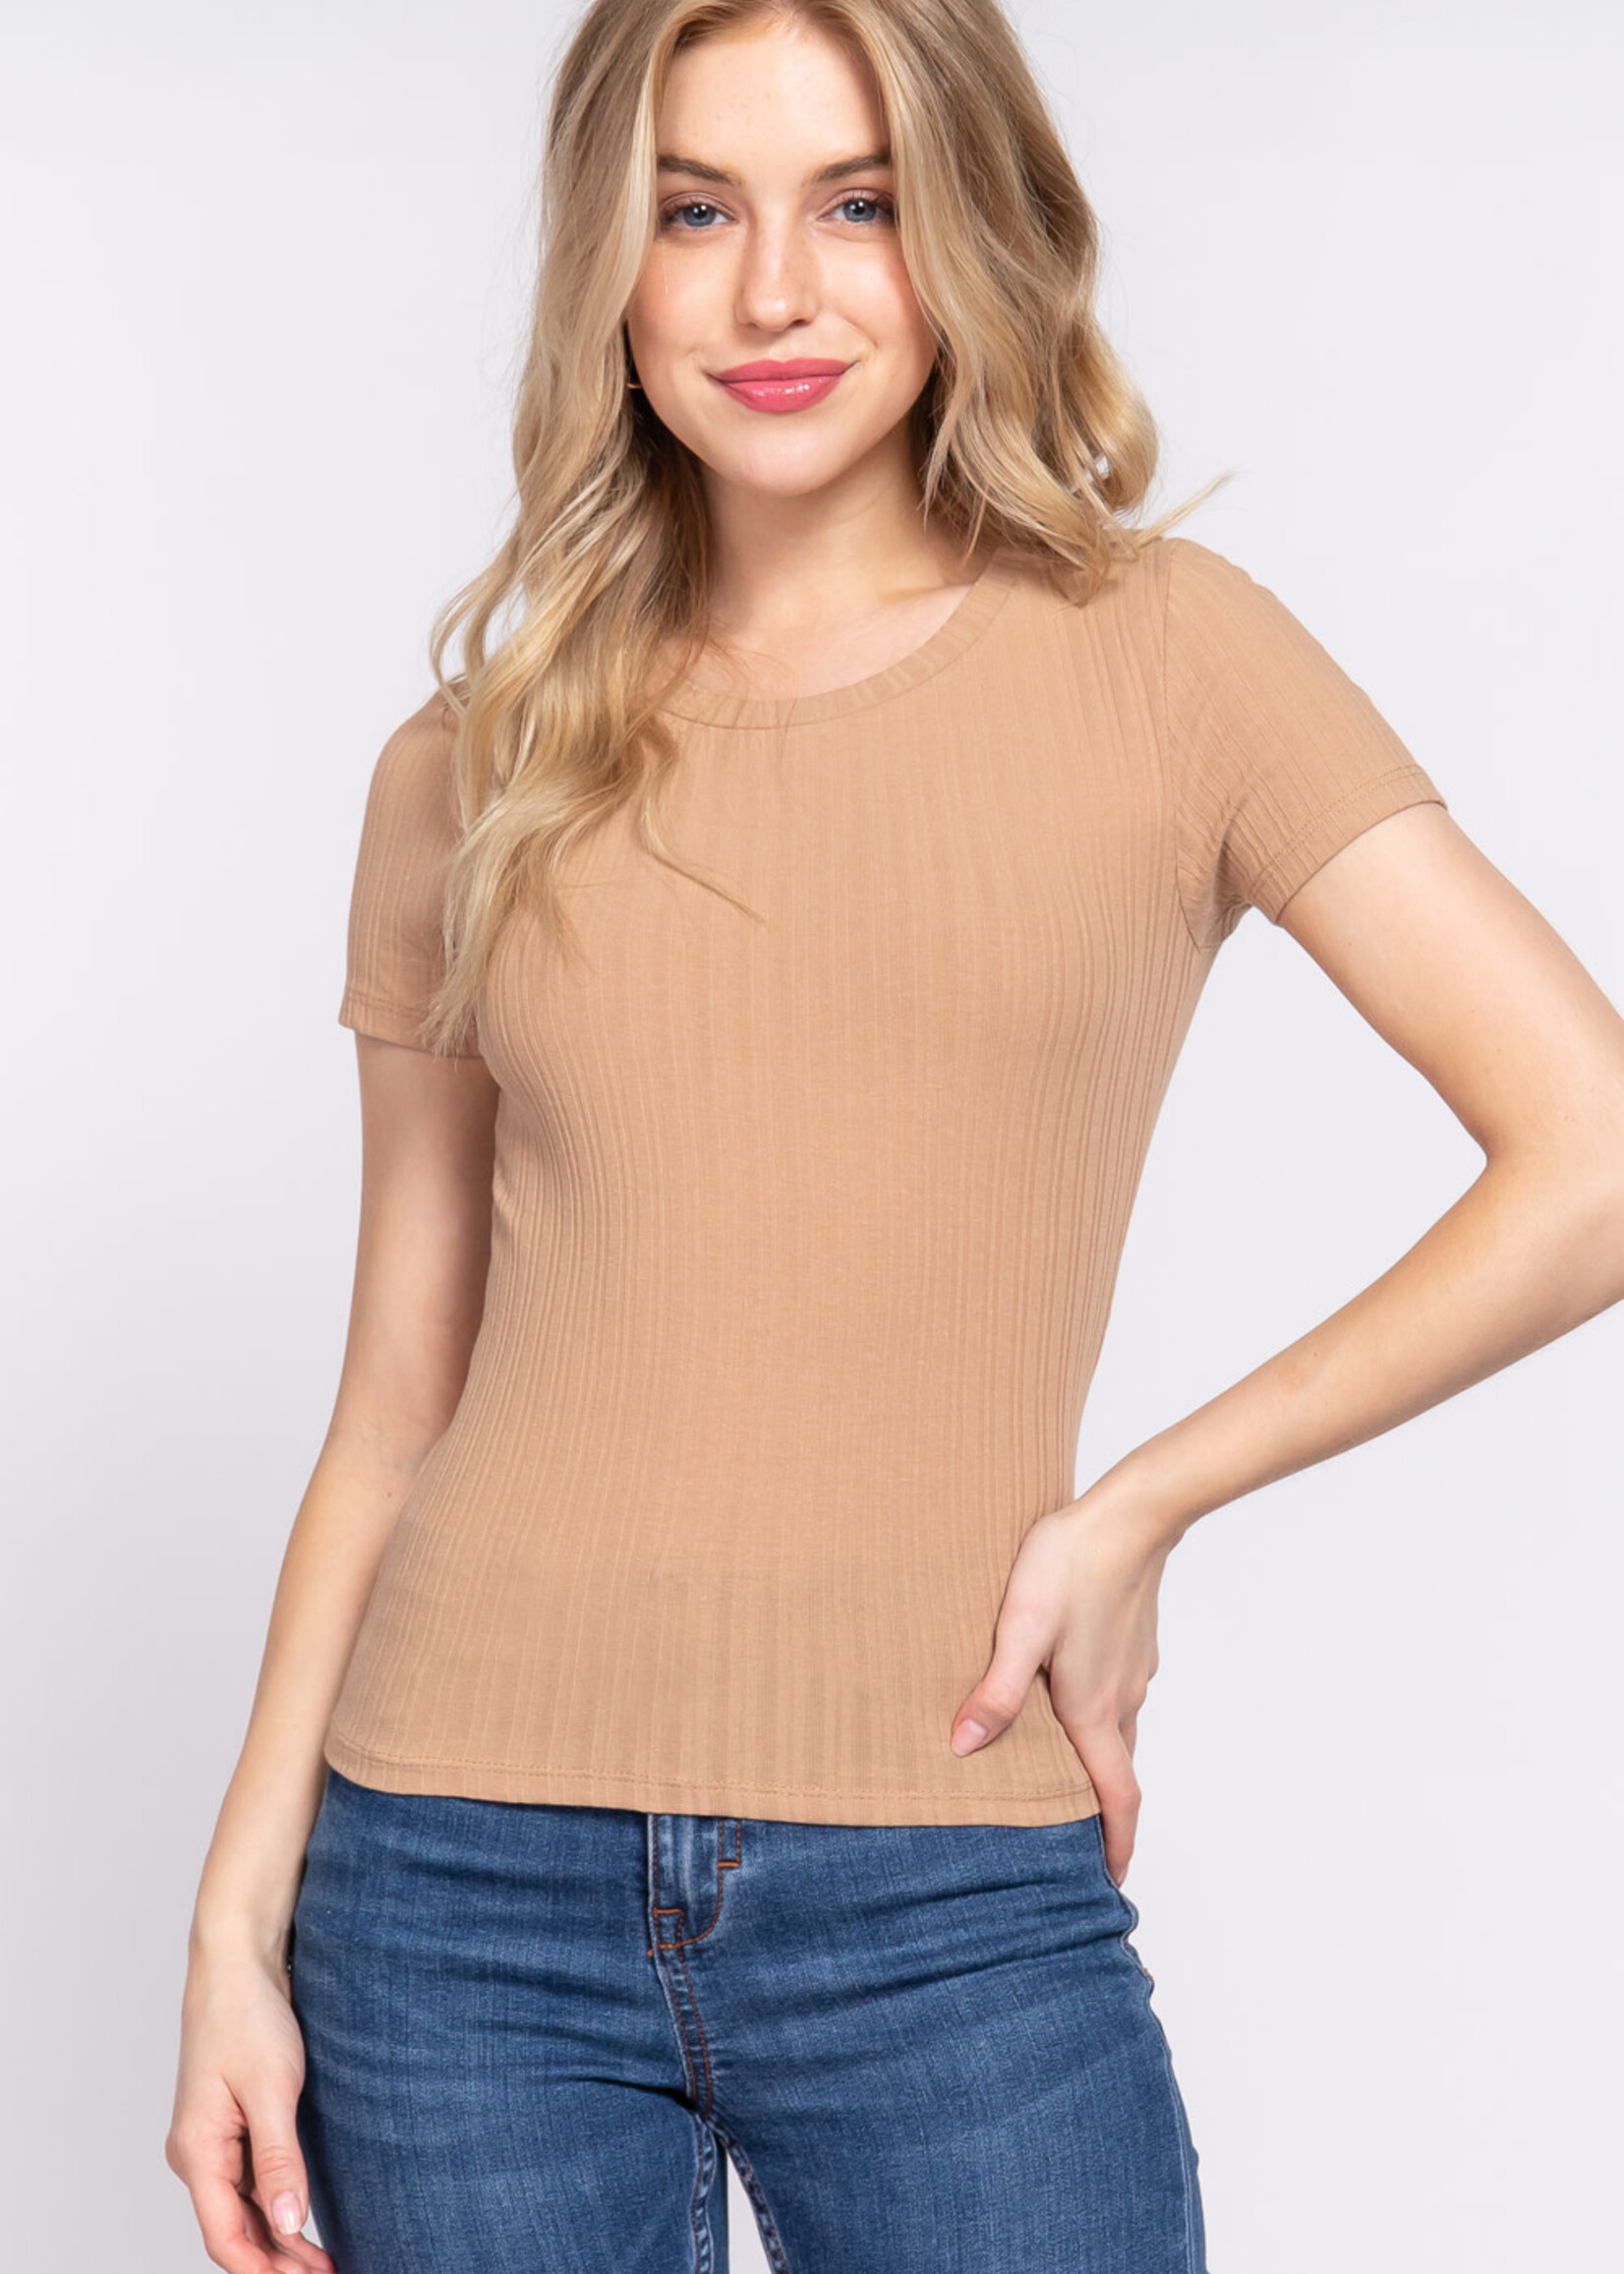 ACTIVE USA, INC. Active USA - Short Slv Crew Neck Variegated Knit Top - T13600